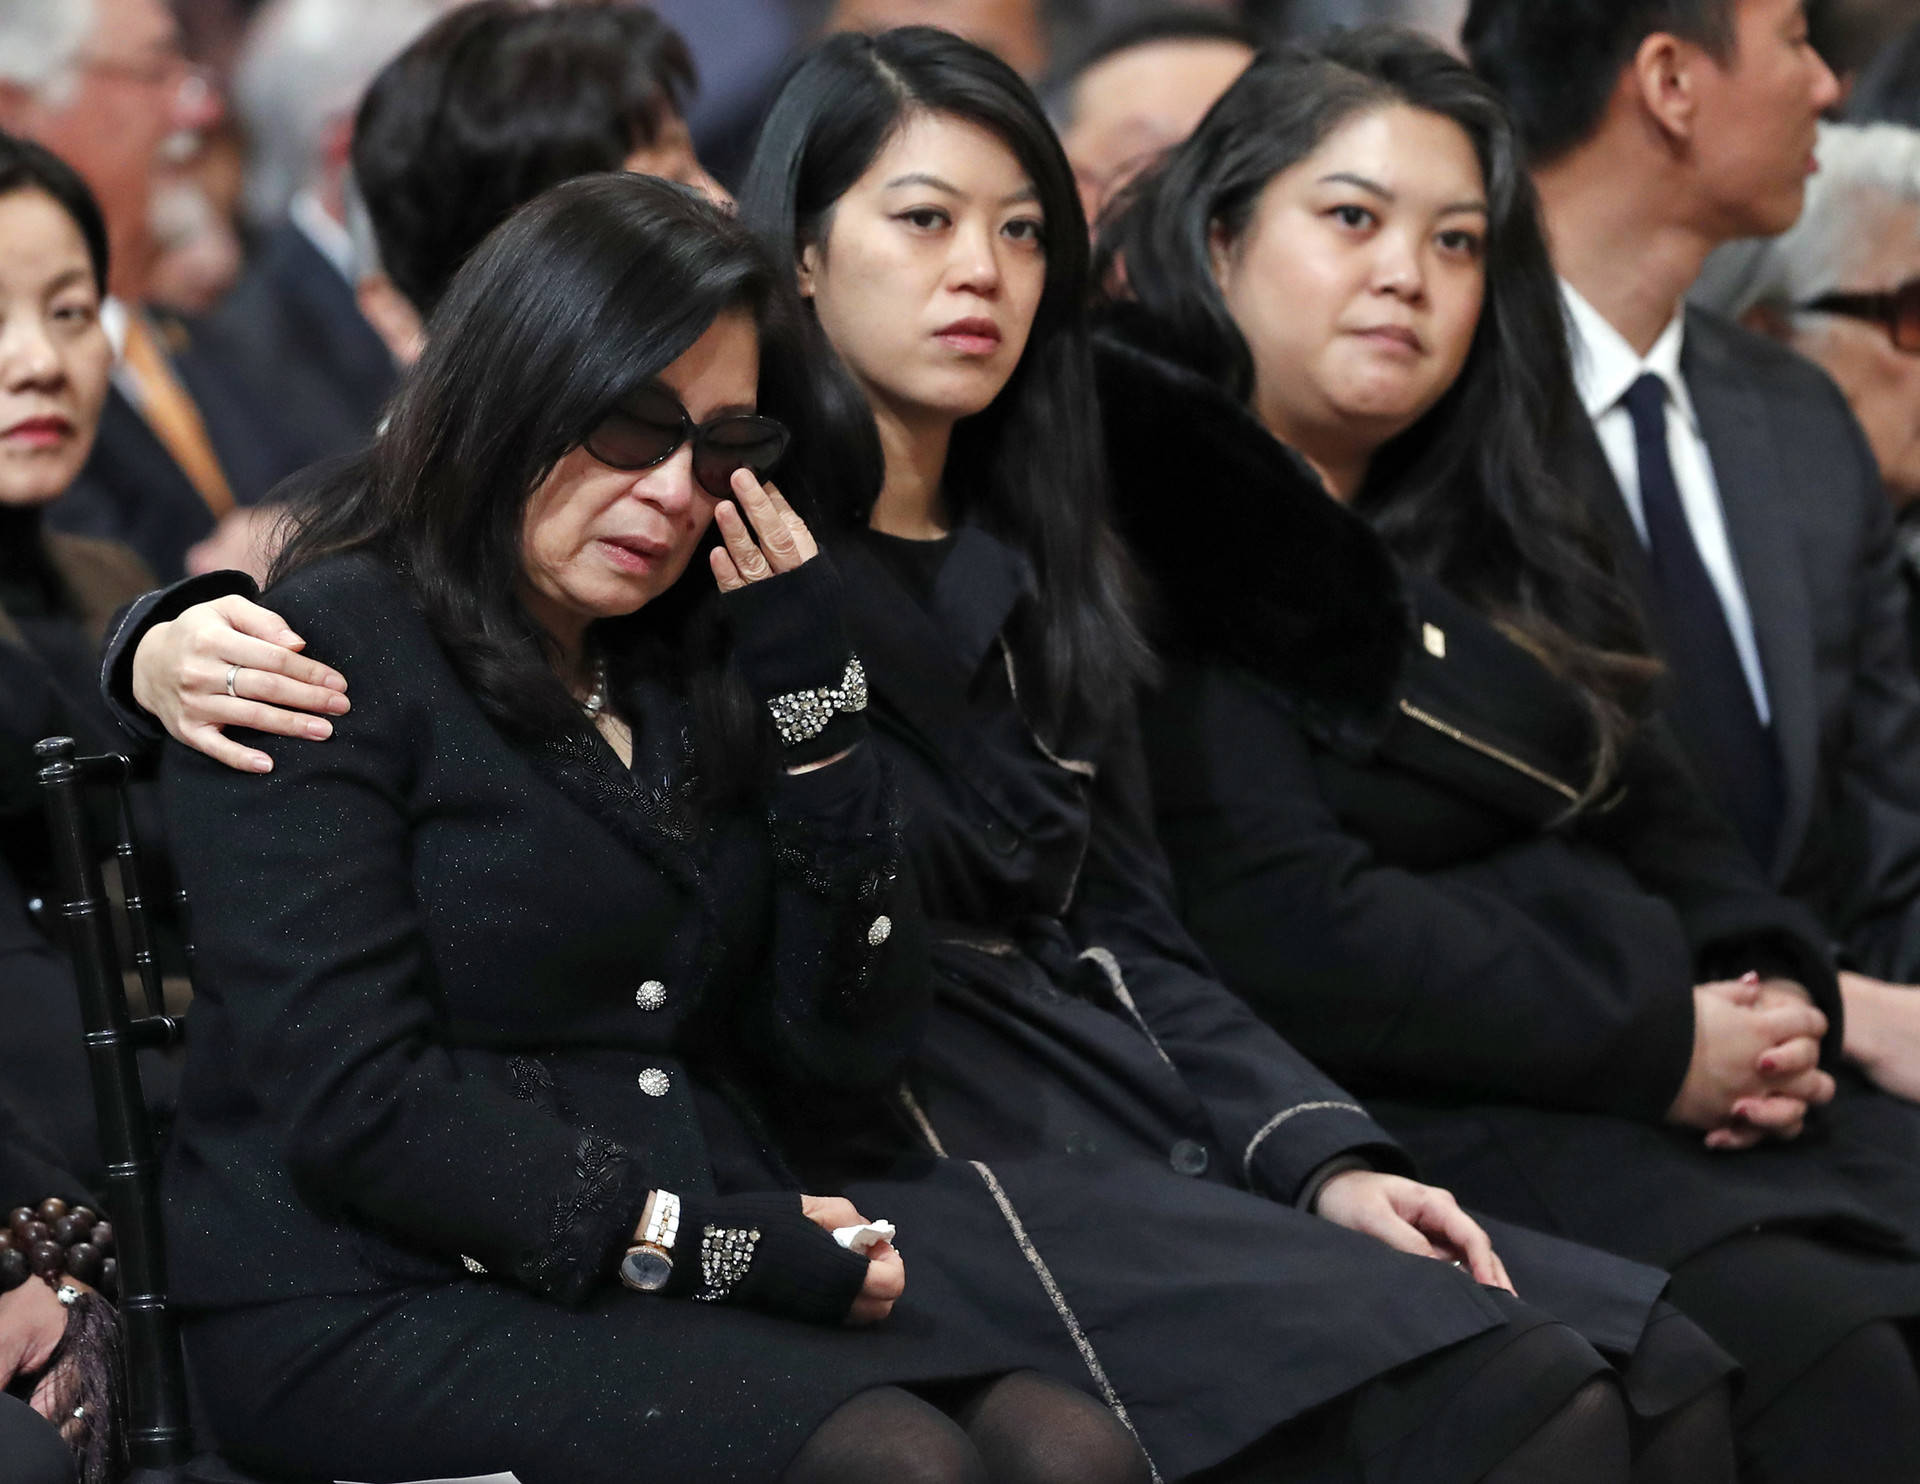 Anita Lee and her daughters, Brianna and Tania, during a service Celebrating the Life of Mayor Edwin M. Lee at San Francisco City Hall on Sunday, Dec. 17, 2017. Scott Strazzante/San Francisco Chronicle via AP, Pool